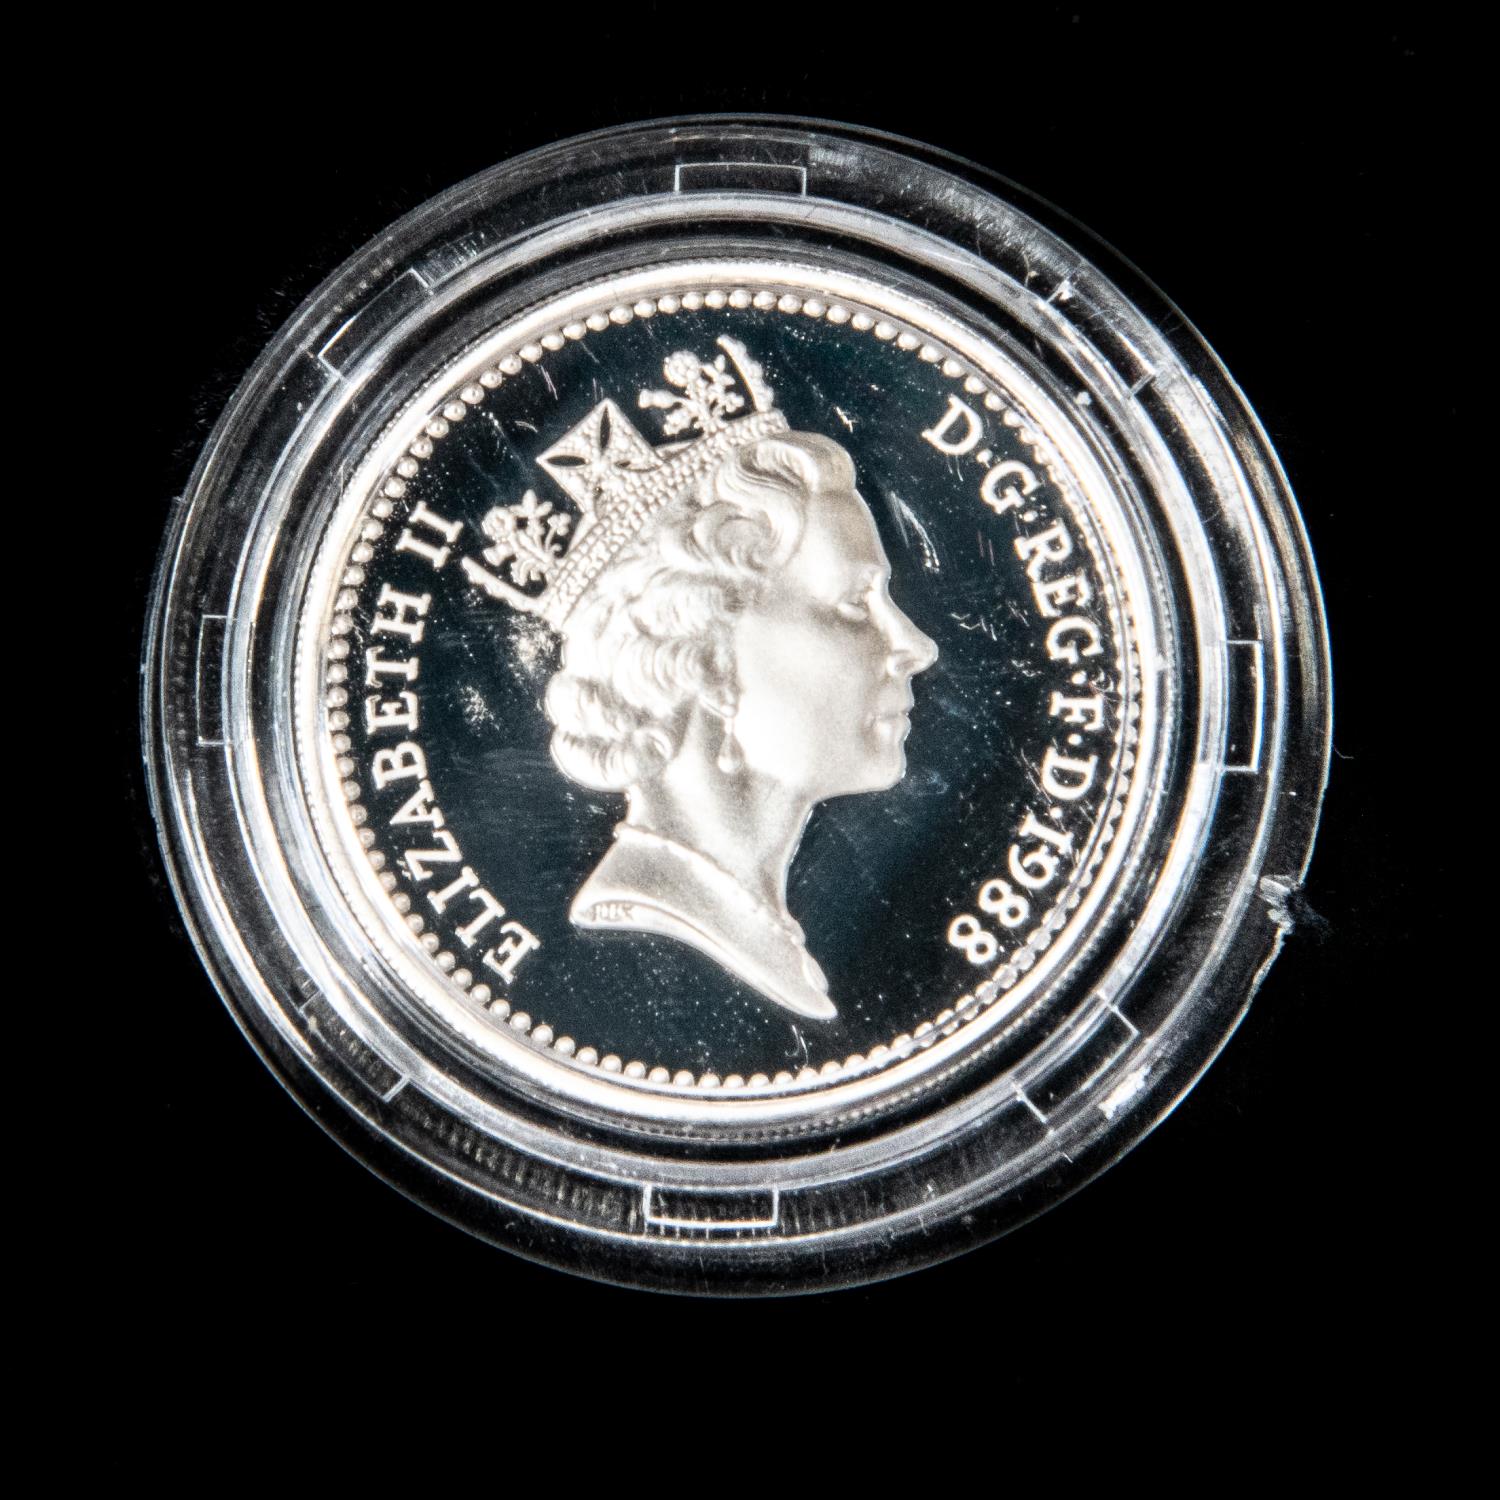 Elizabeth II silver proof issue £1 1988; Silver proof crown, 1981 commemorating the wedding of the - Image 9 of 11